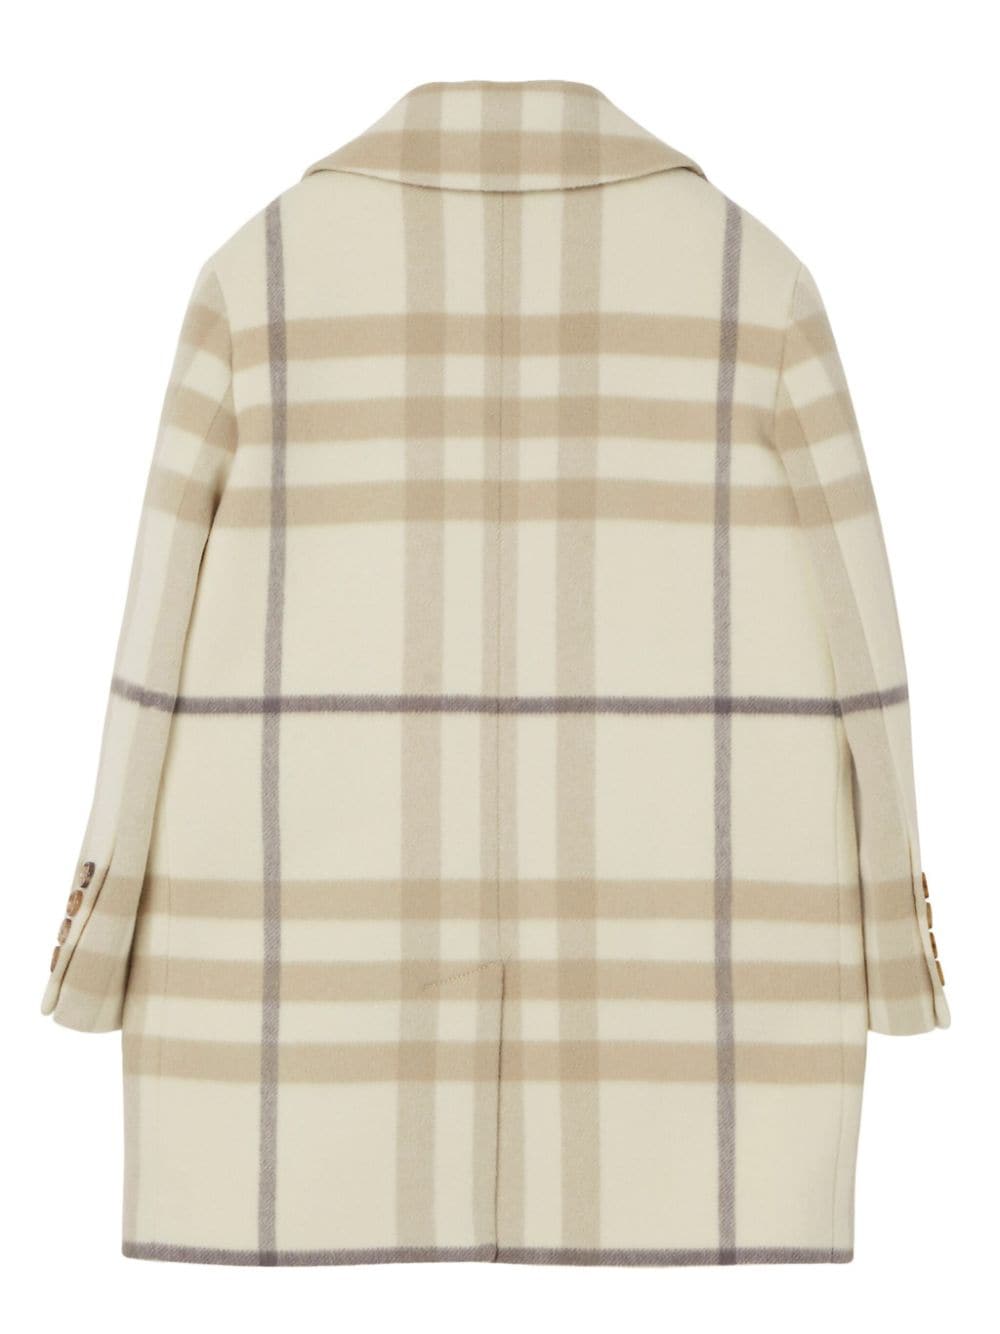 Burberry Kids checked double-breasted coat - Beige